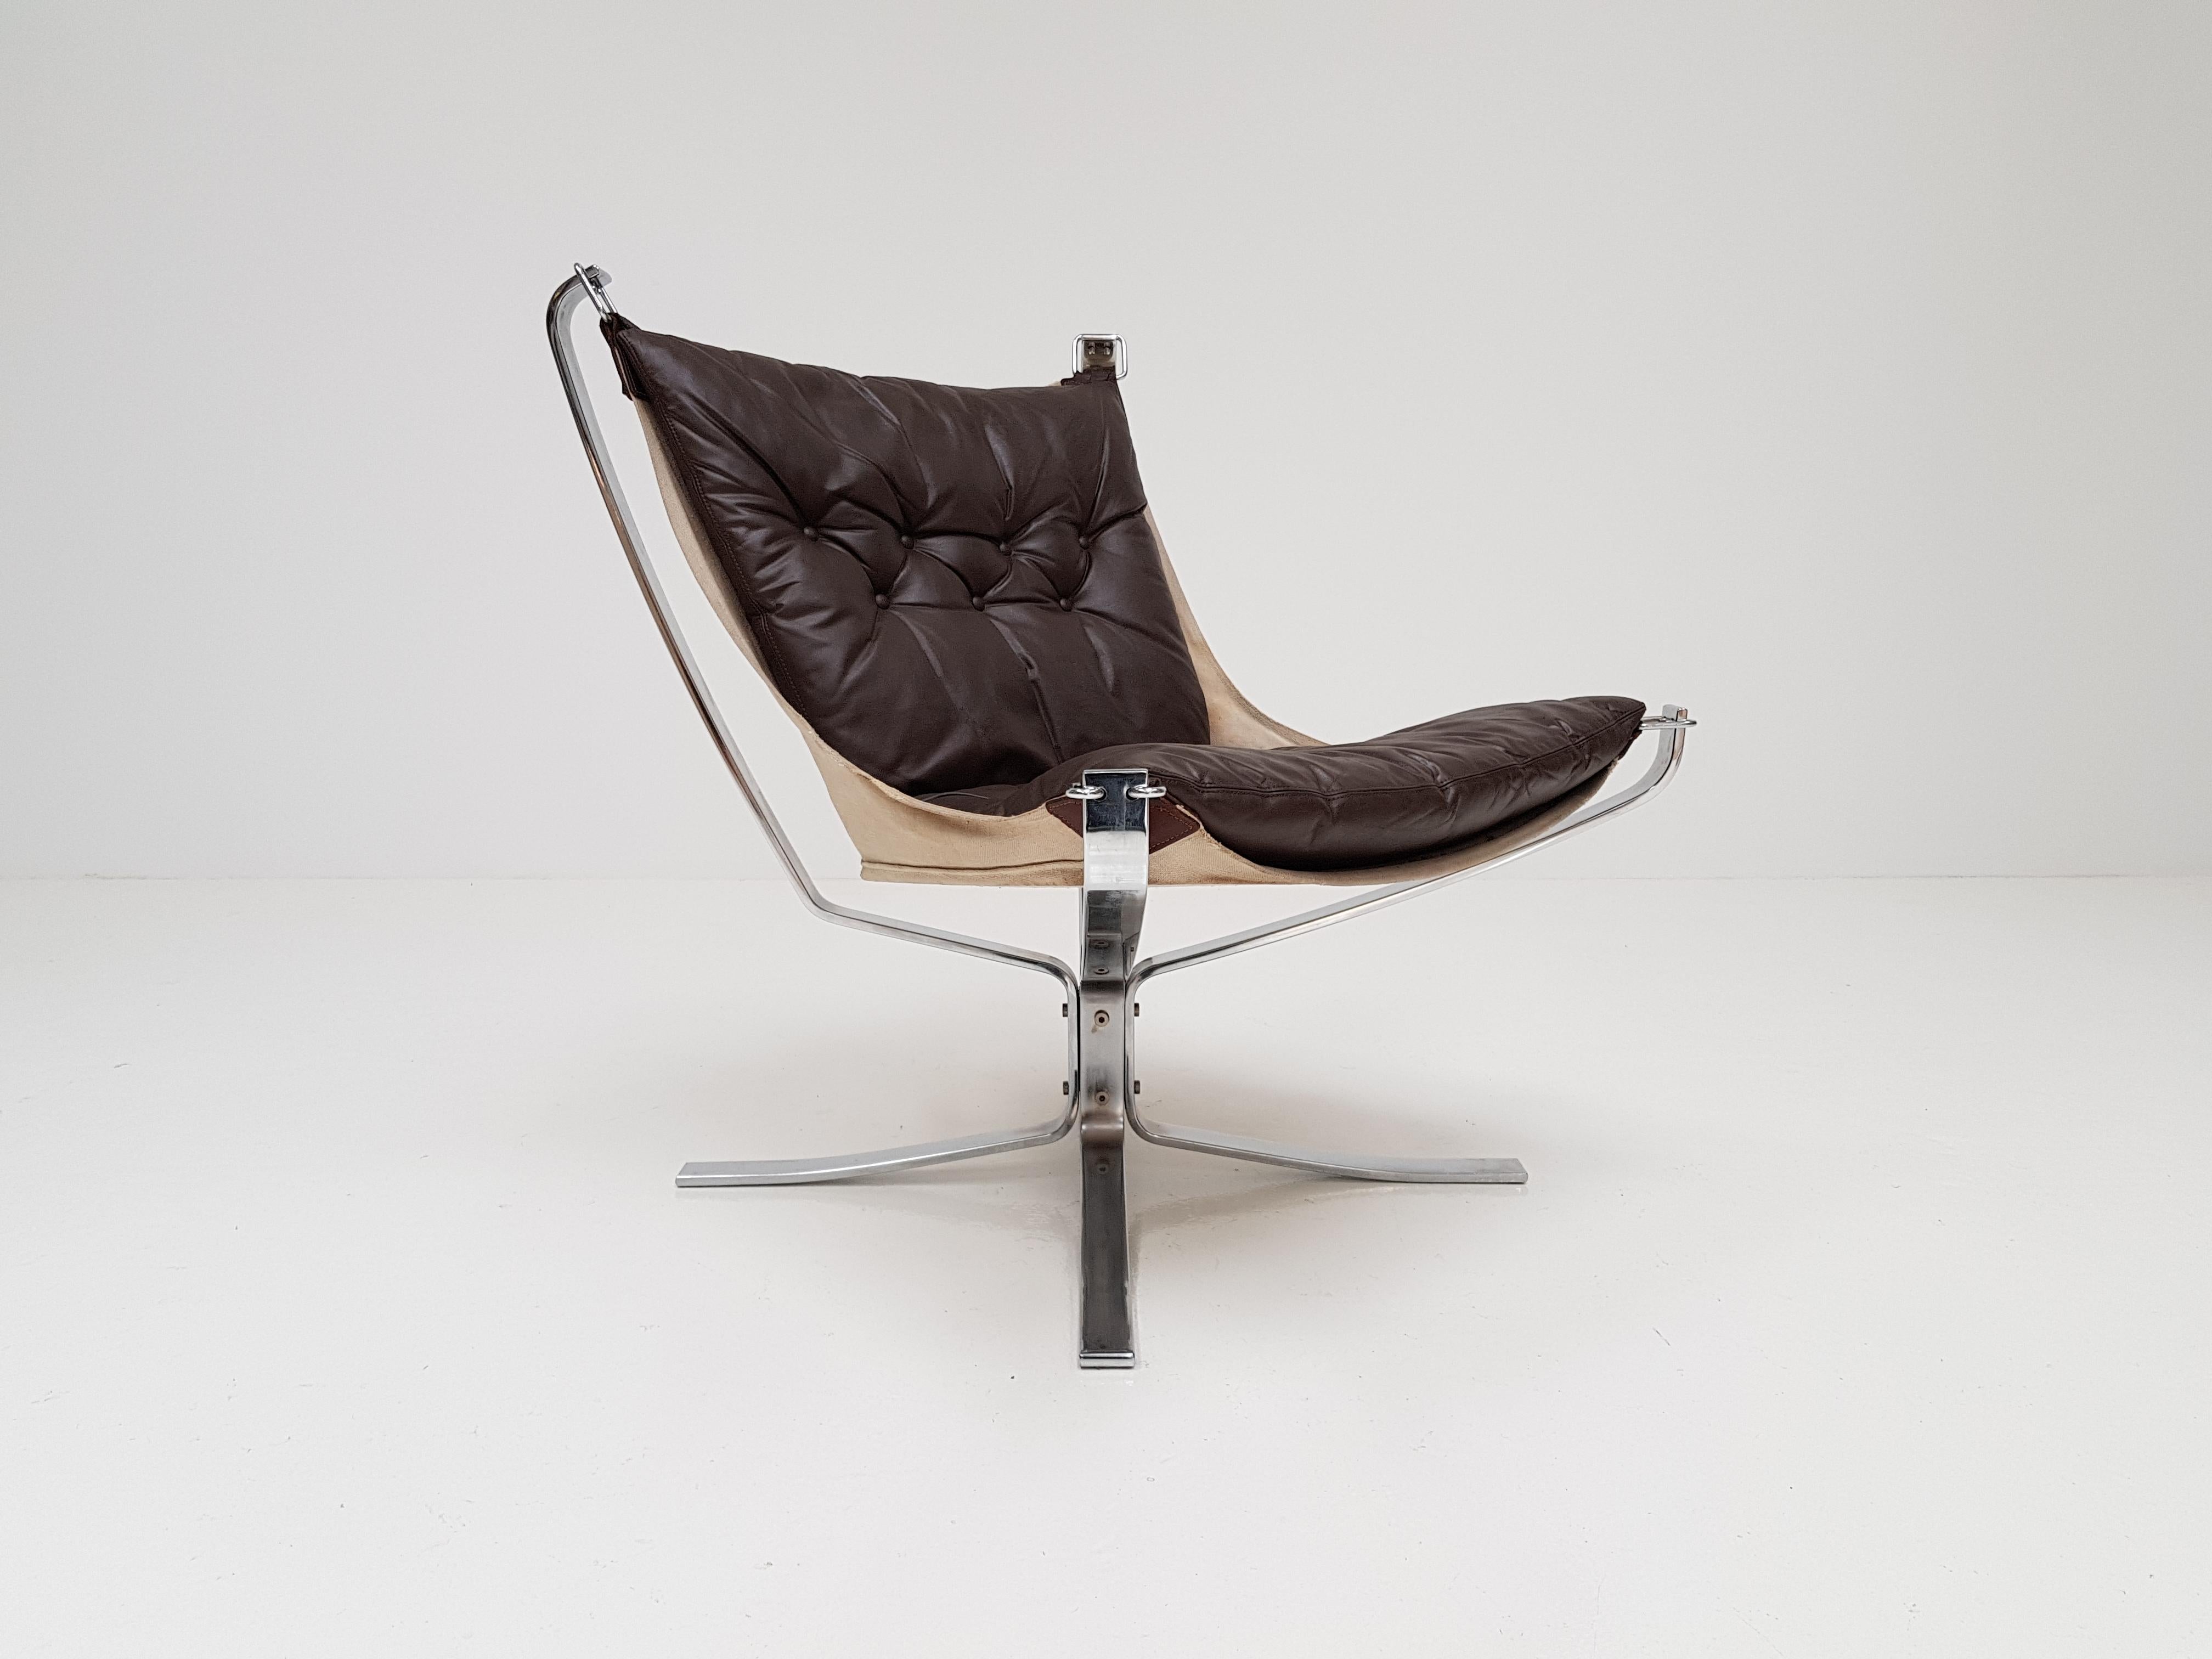 Iconic vintage low-backed X-framed Sigurd Ressell designed 1970s Falcon chair on a chrome-plated steel base.

A super comfortable, amazing looking 1970s Sigurd Ressell designed iconic Falcon chair. X-framed with hammock design. 

A stunning